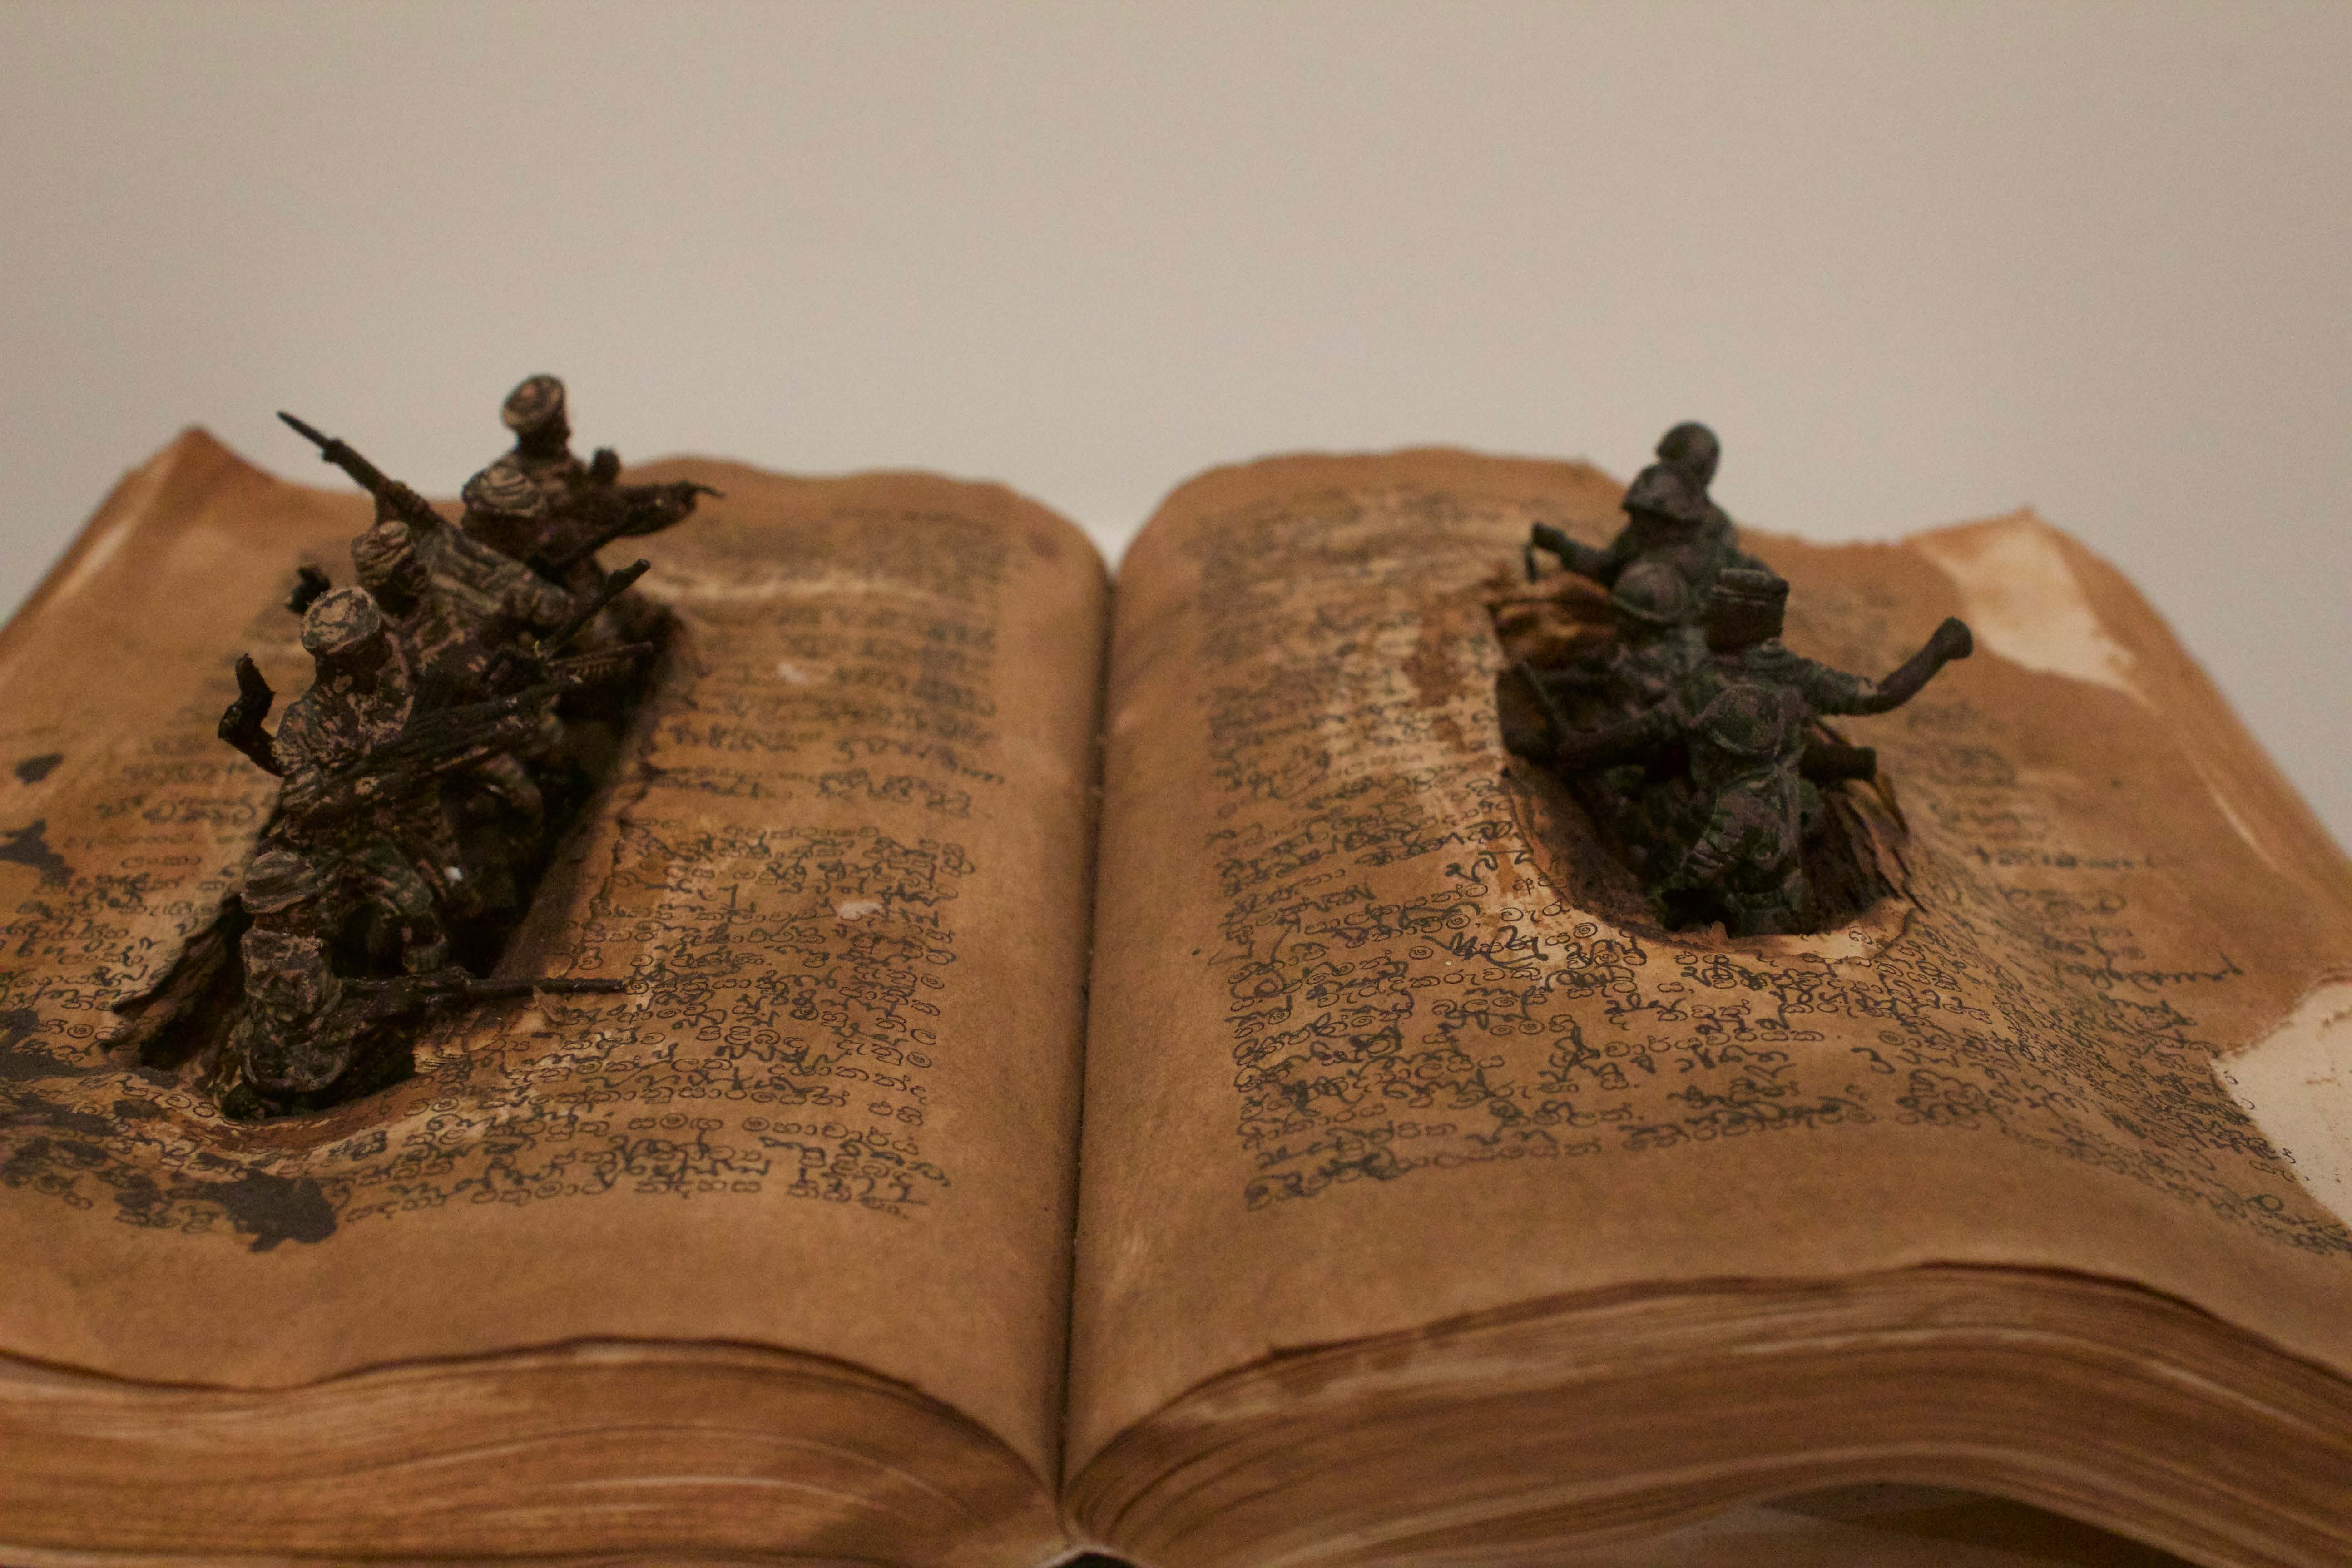 Kingsley Gunatillake, book art, Used books and toy soldiers